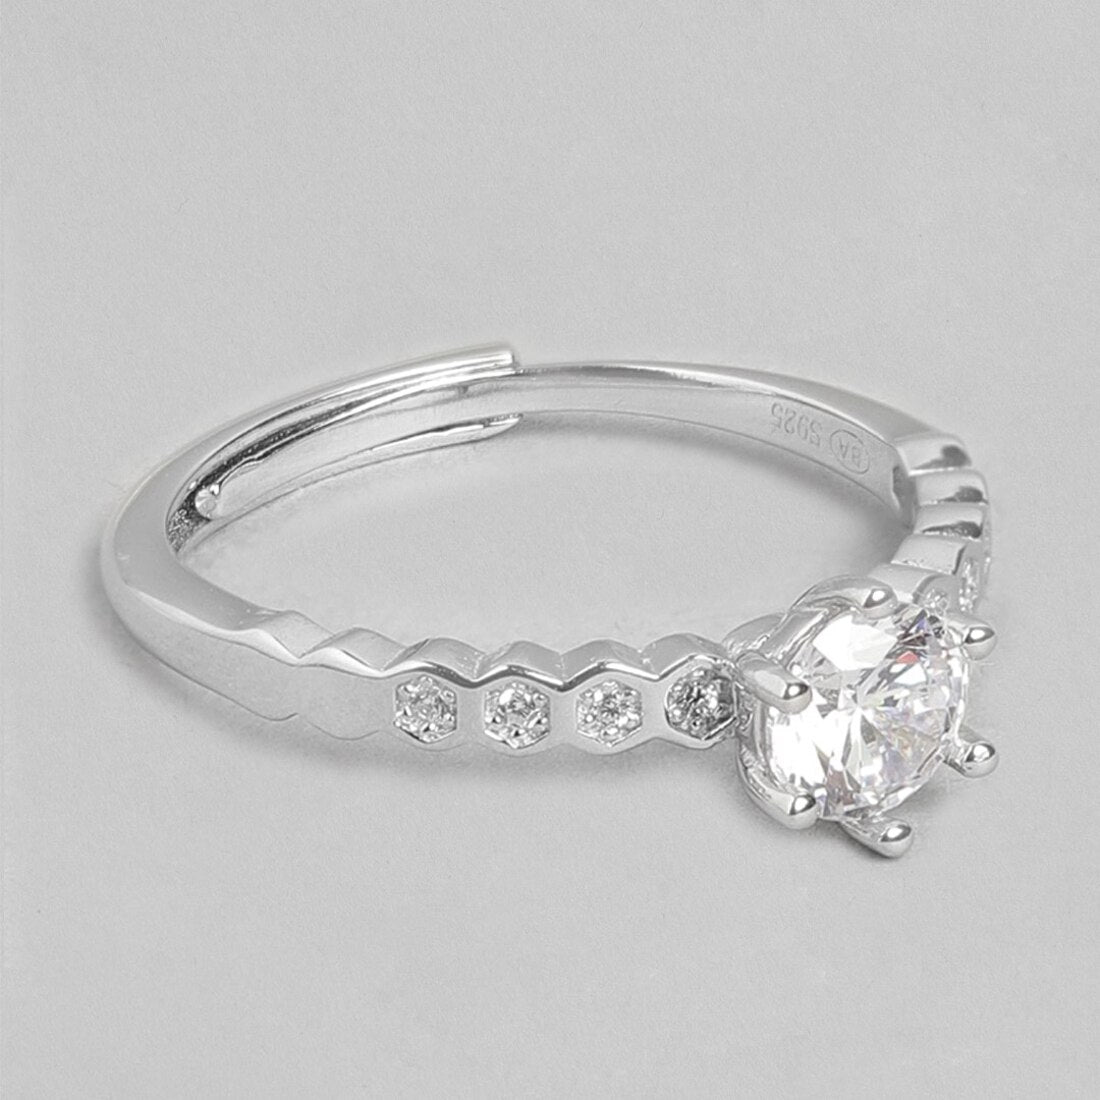 The Princess Solitaire 925 Silver Ring (Adjustable)